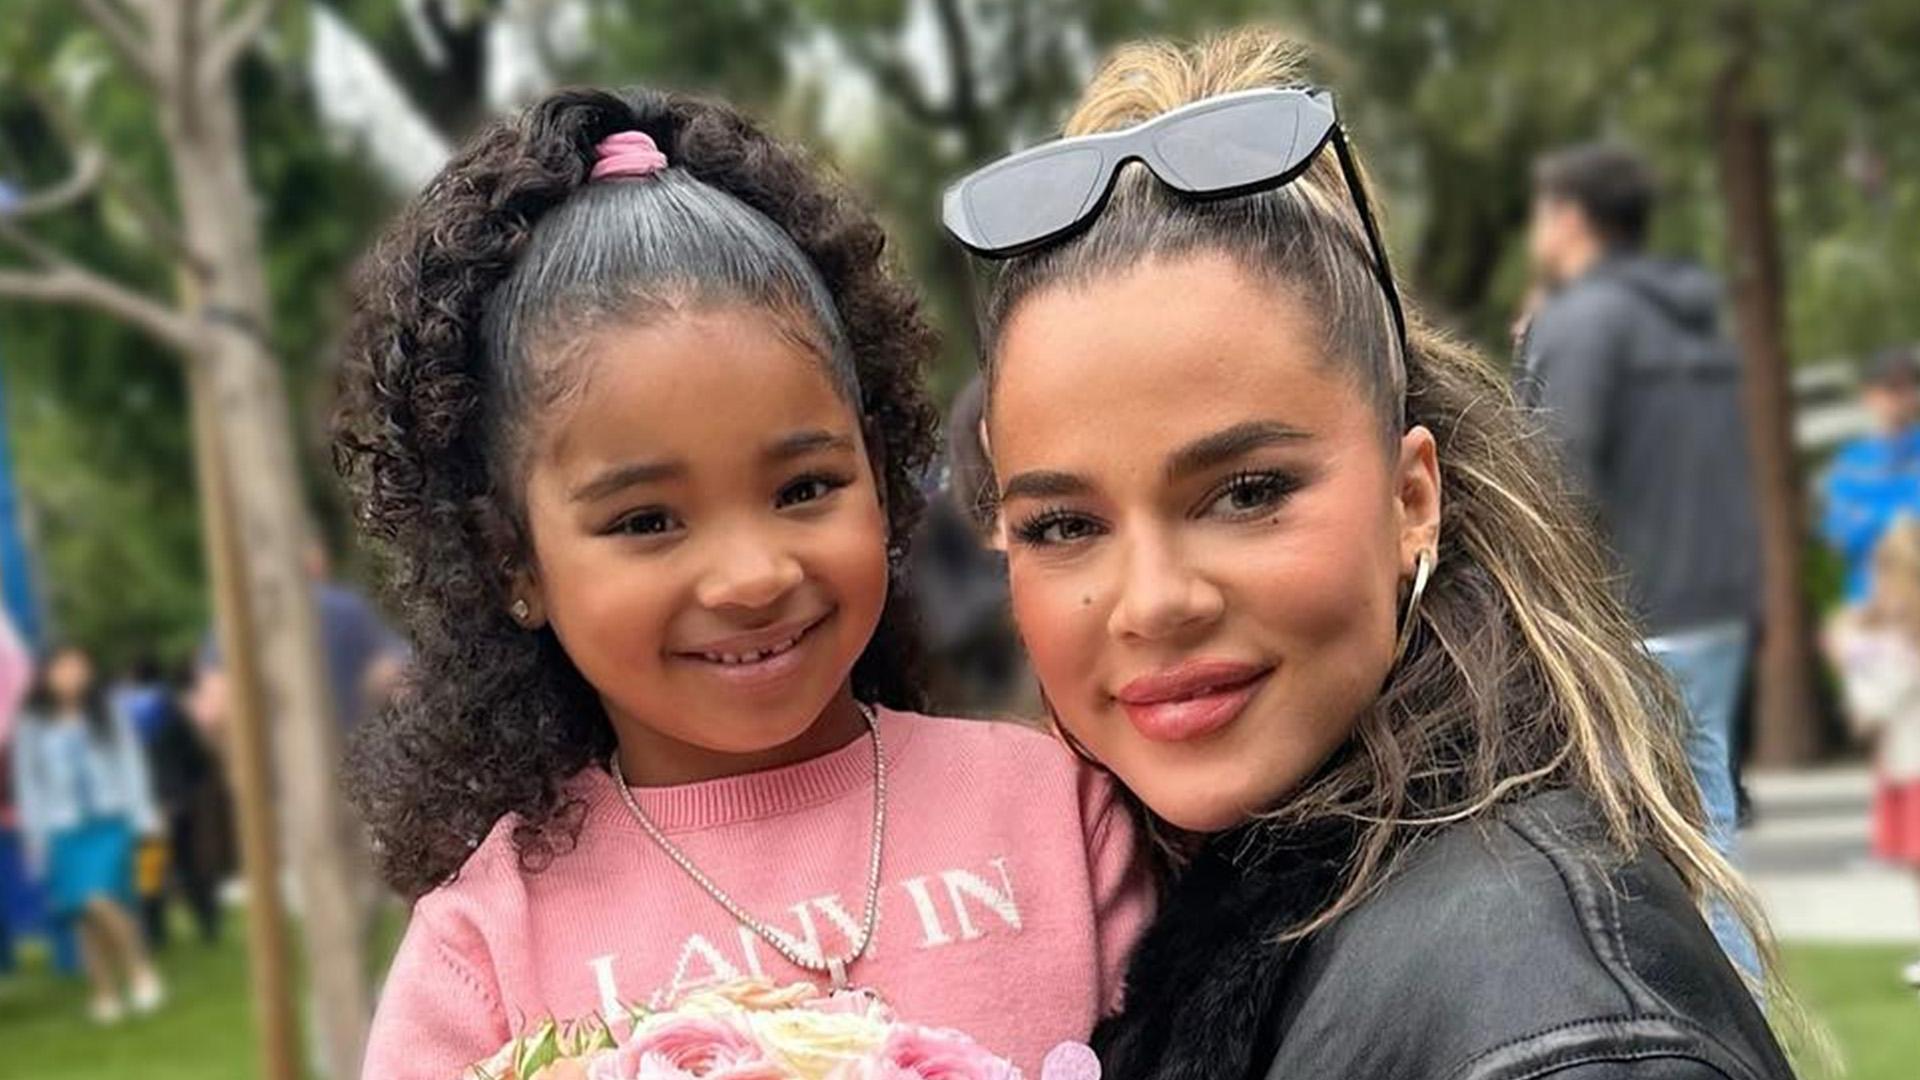 Khloe Kardashian begs for answers as daughter True Thompson borrows books on whales despite famous mom’s phobia [Video]